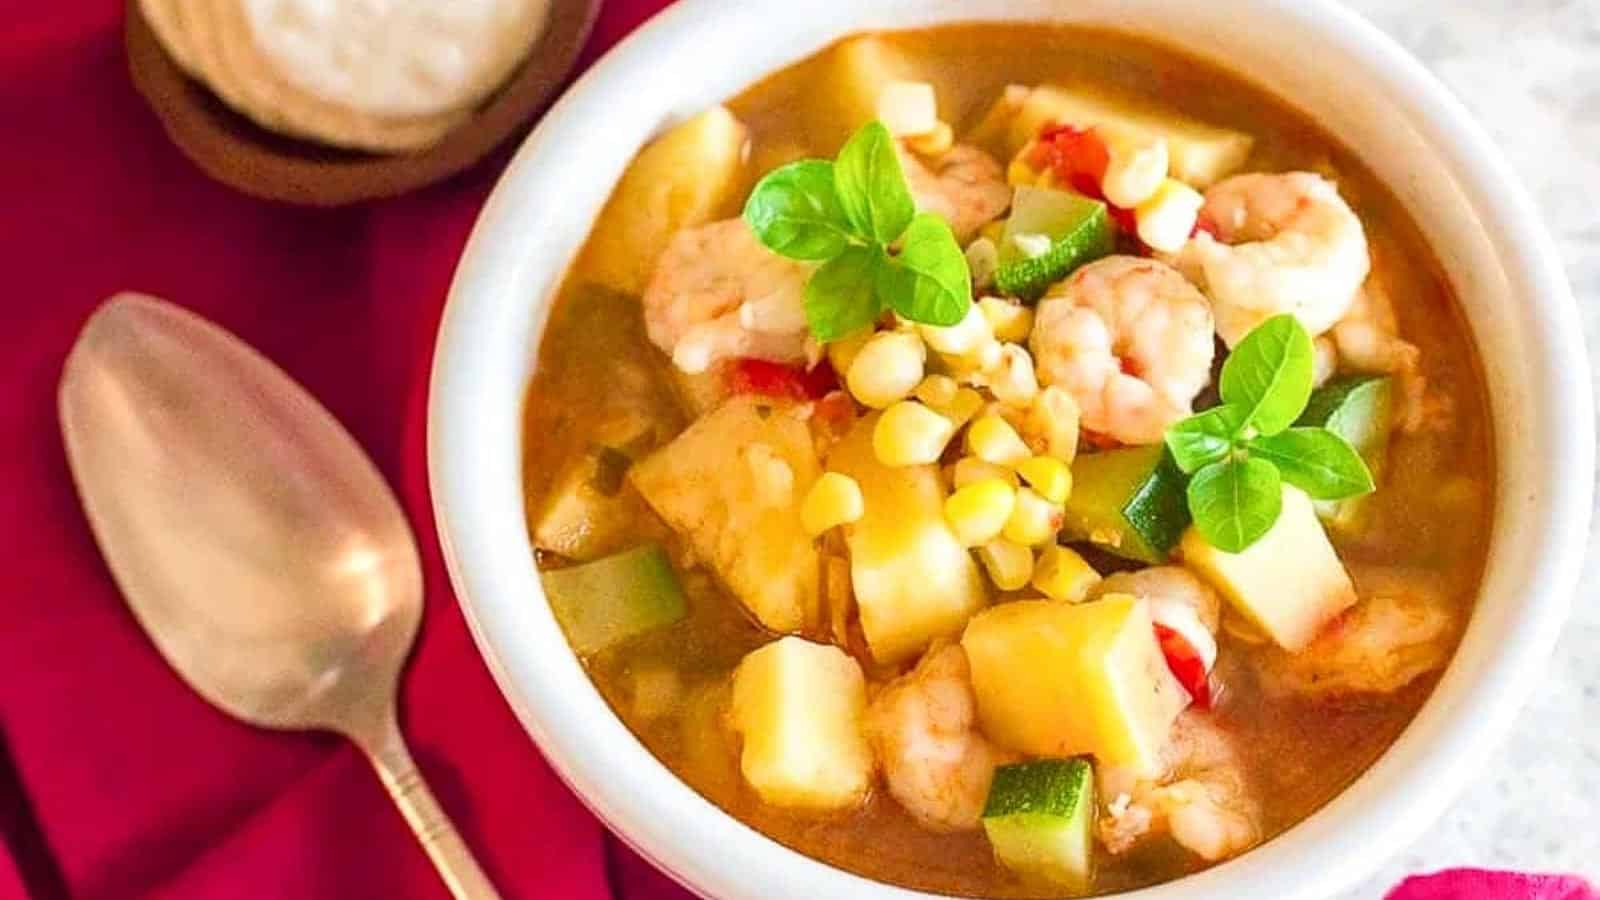 Low-FODMAP-Shrimp-Corn-Chowder-in-white-bowl-crackers-and-spoon-alongside.